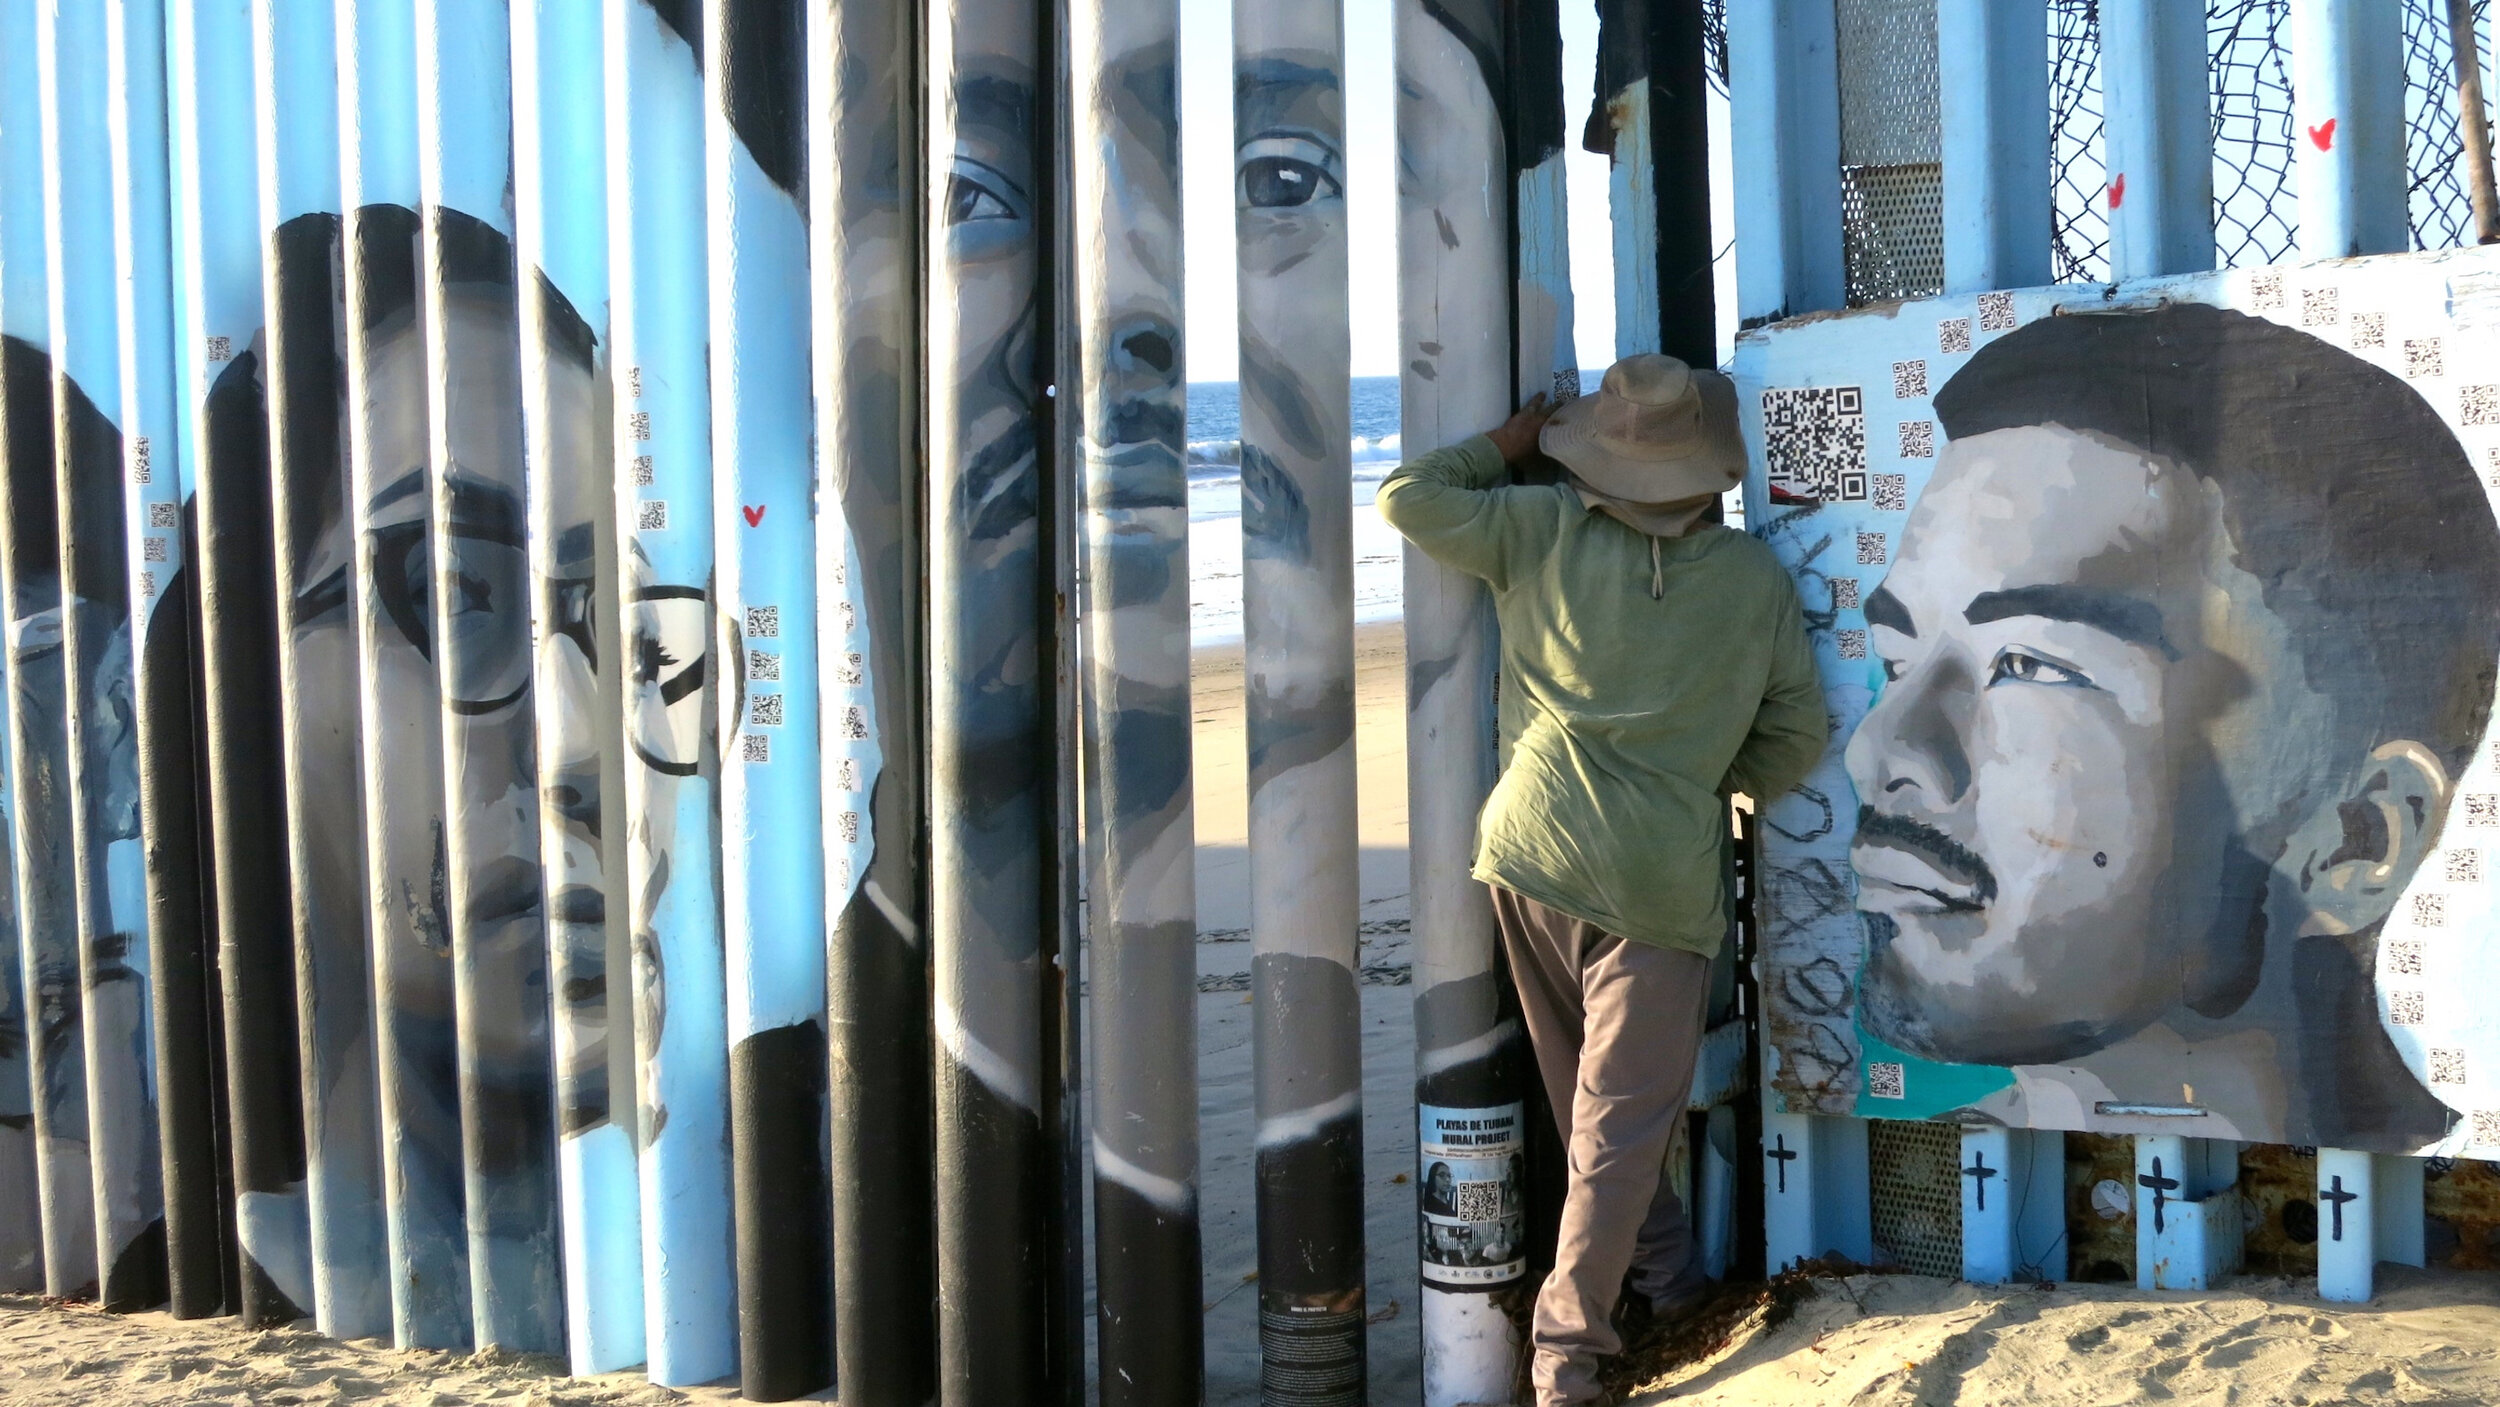 THE GREAT WALL OF TIJUANA | All images this page © Phoebe Eaton 2024 | All rights reserved